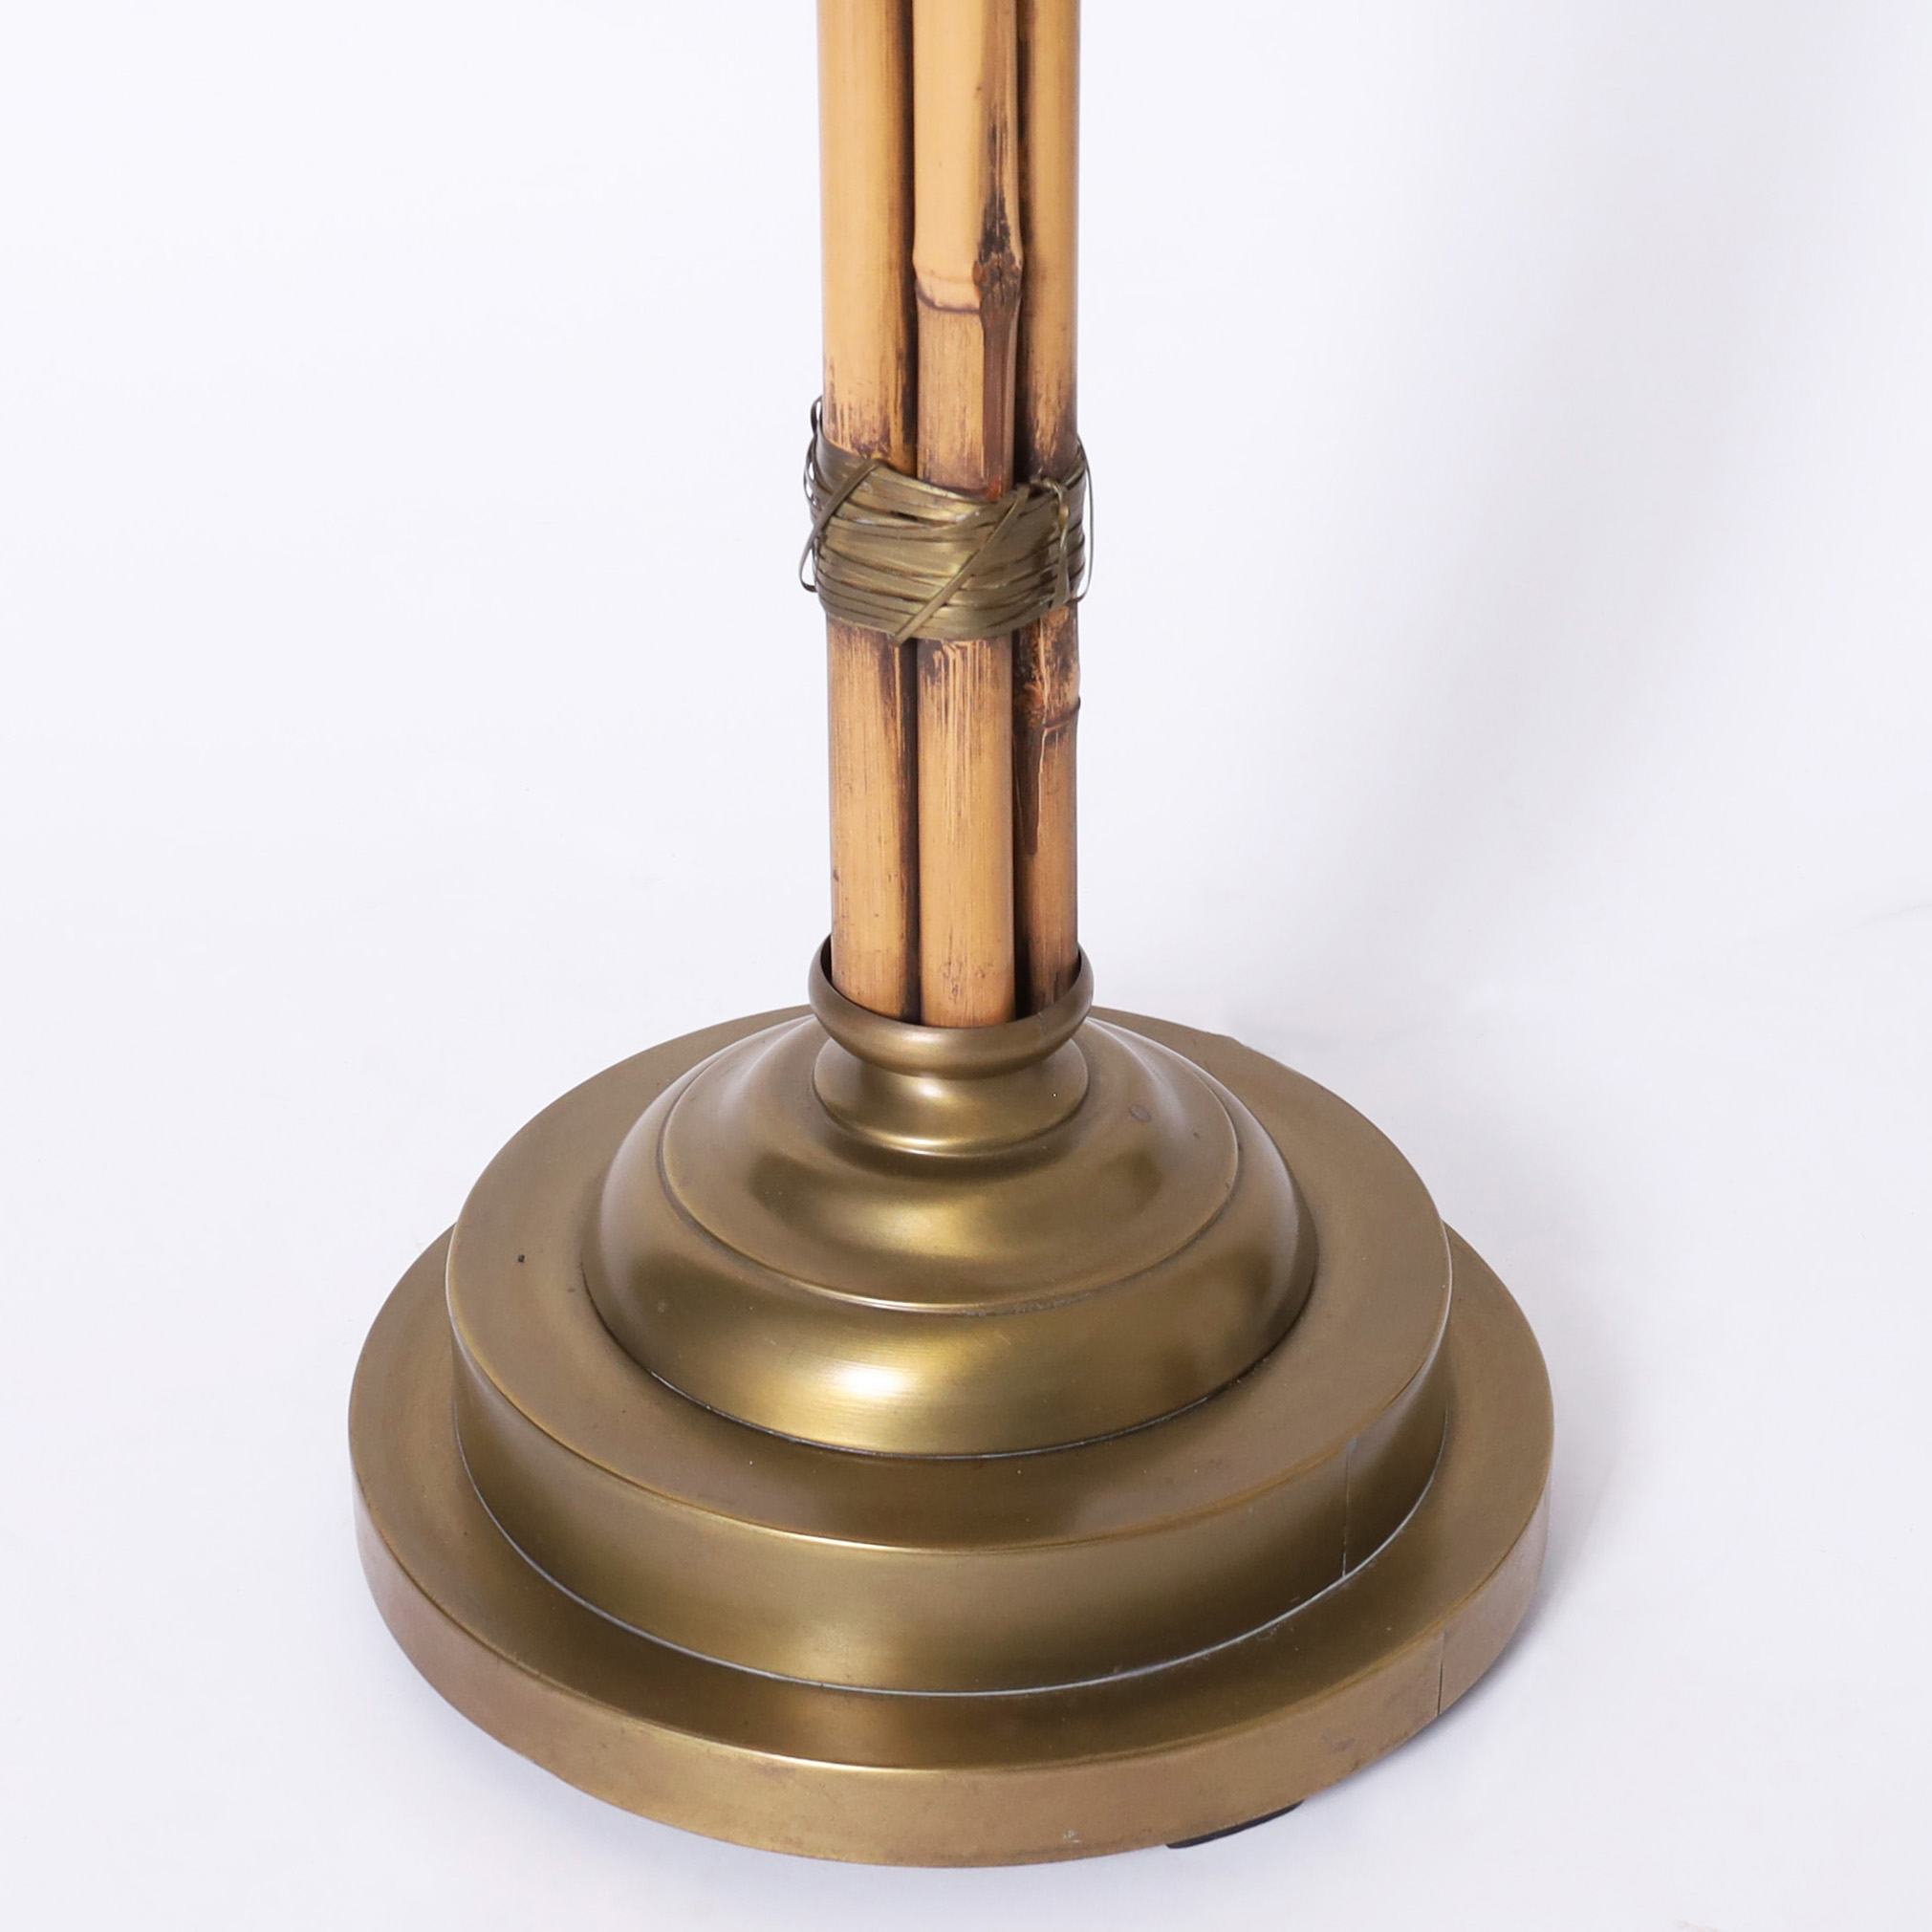 Vintage Bamboo and Brass Floor lamp